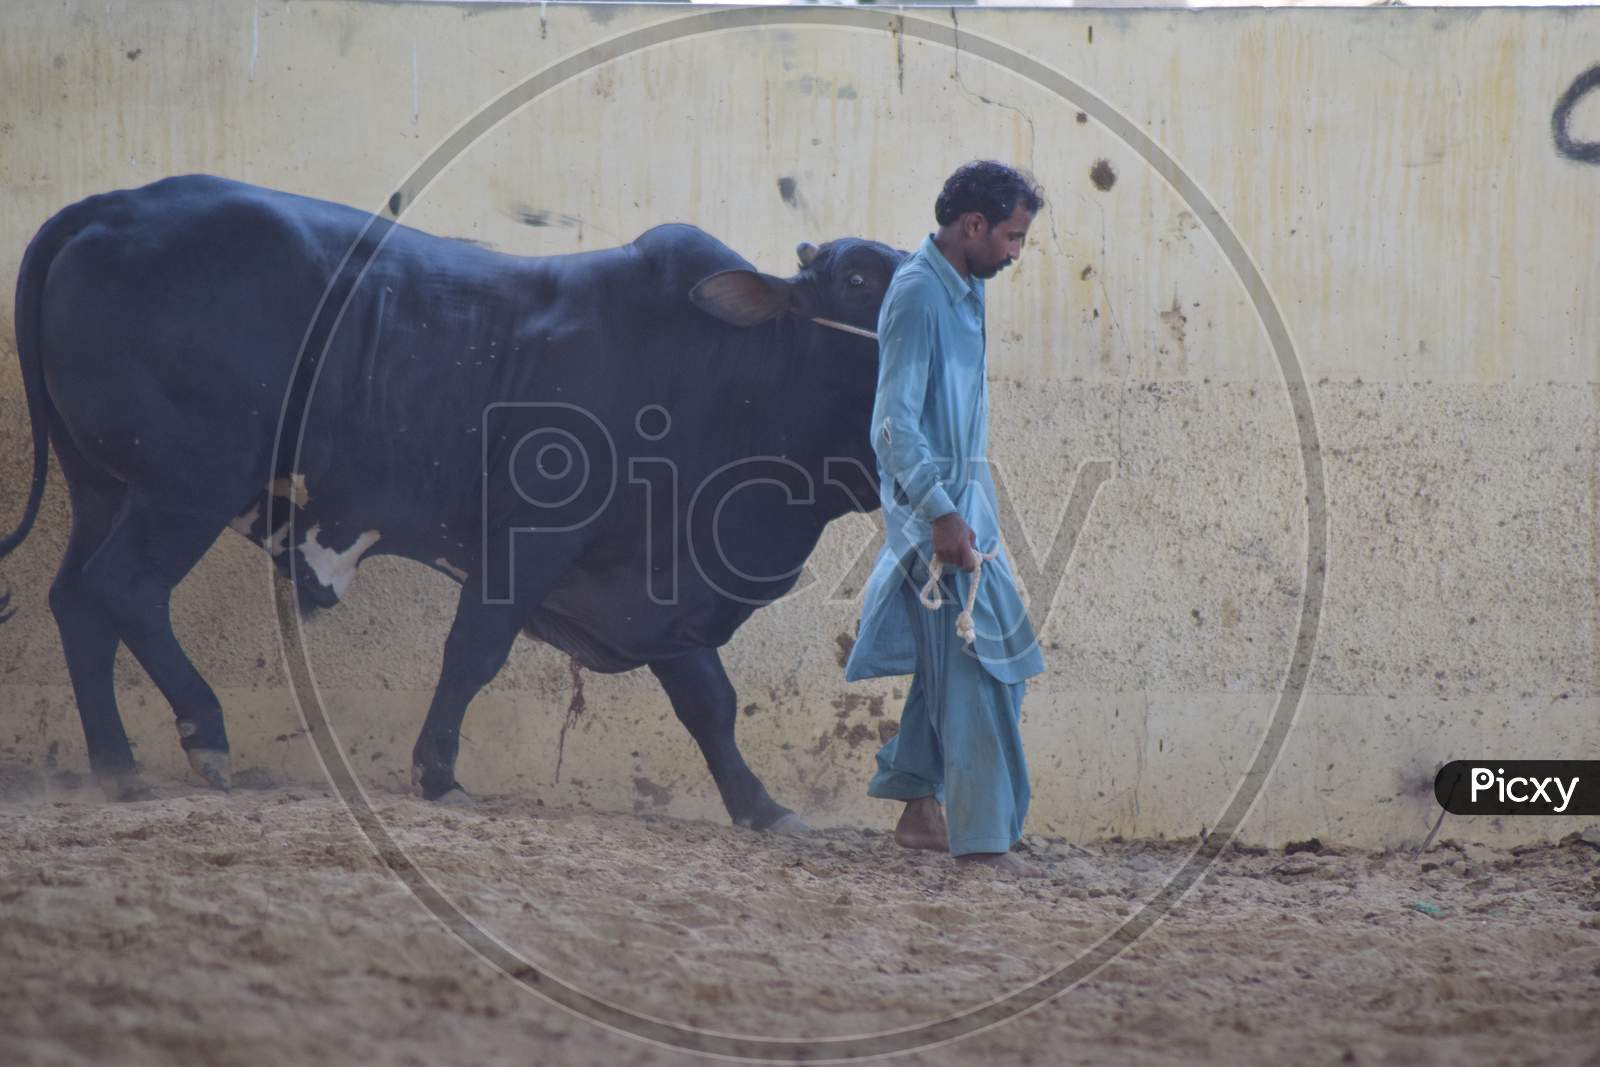 A Man with a Bull in the Cattle Farm